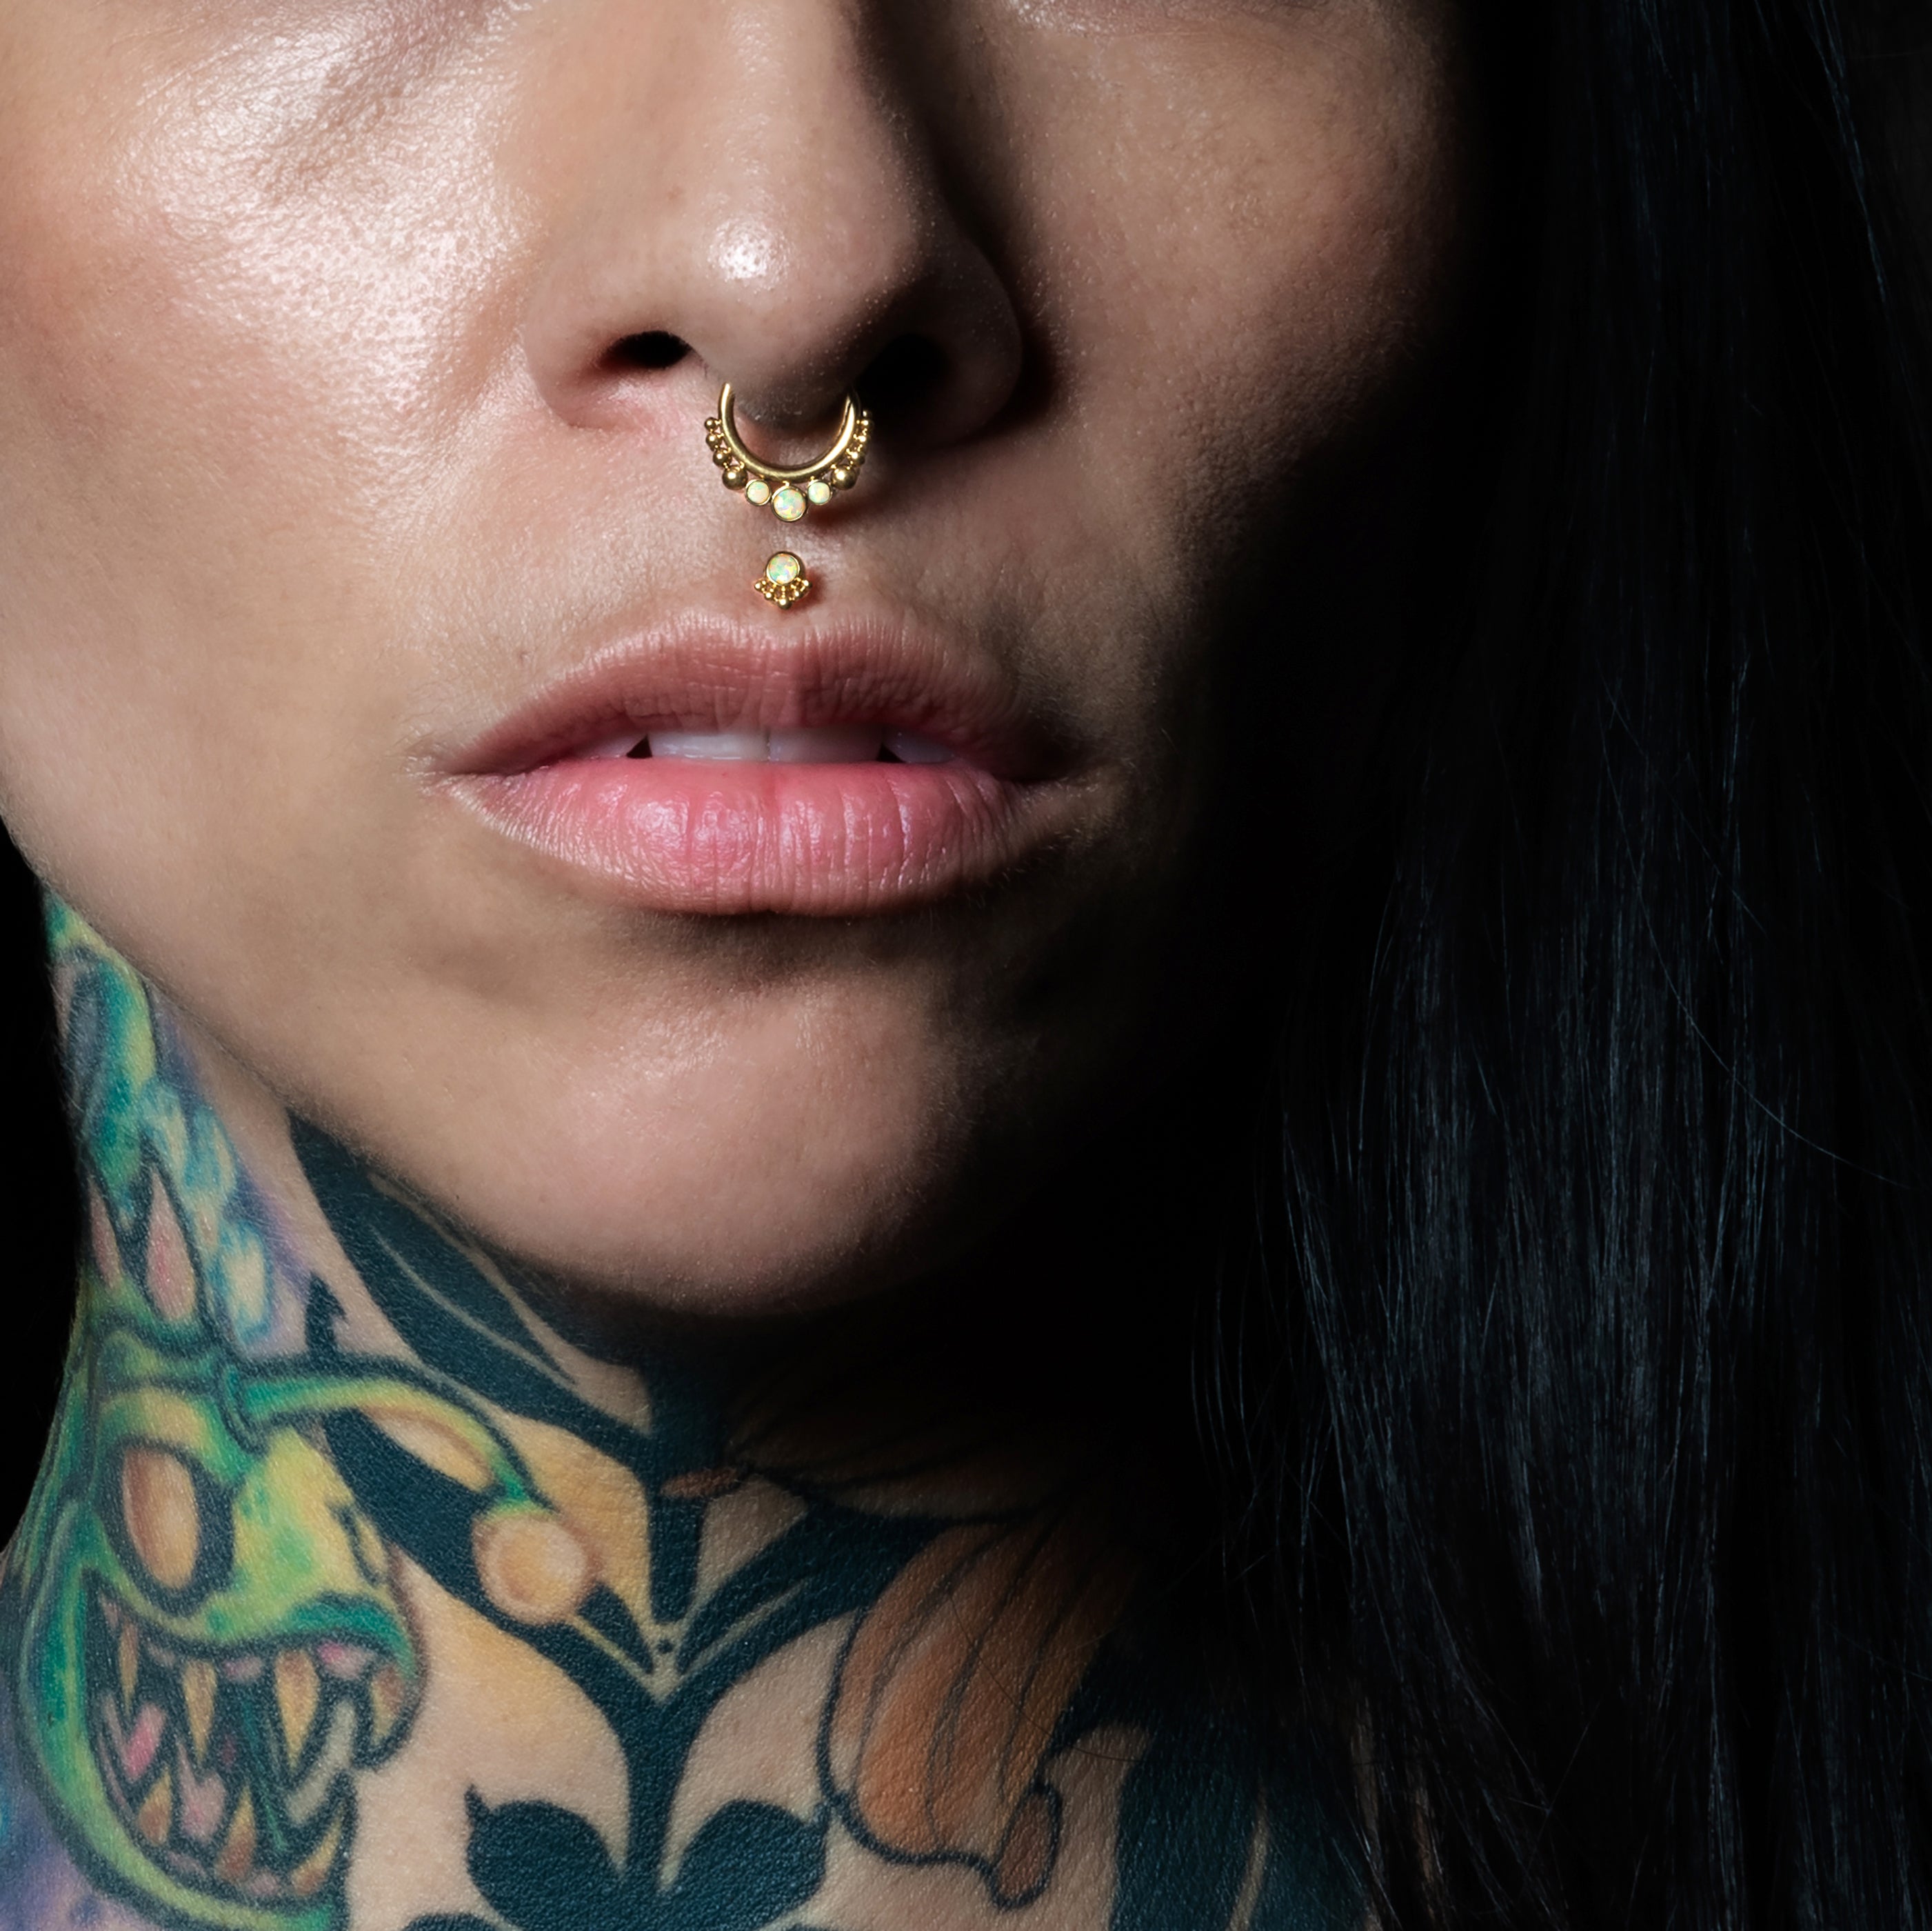 model wearing Layla Golden Labret with Opal and siti septum clicker